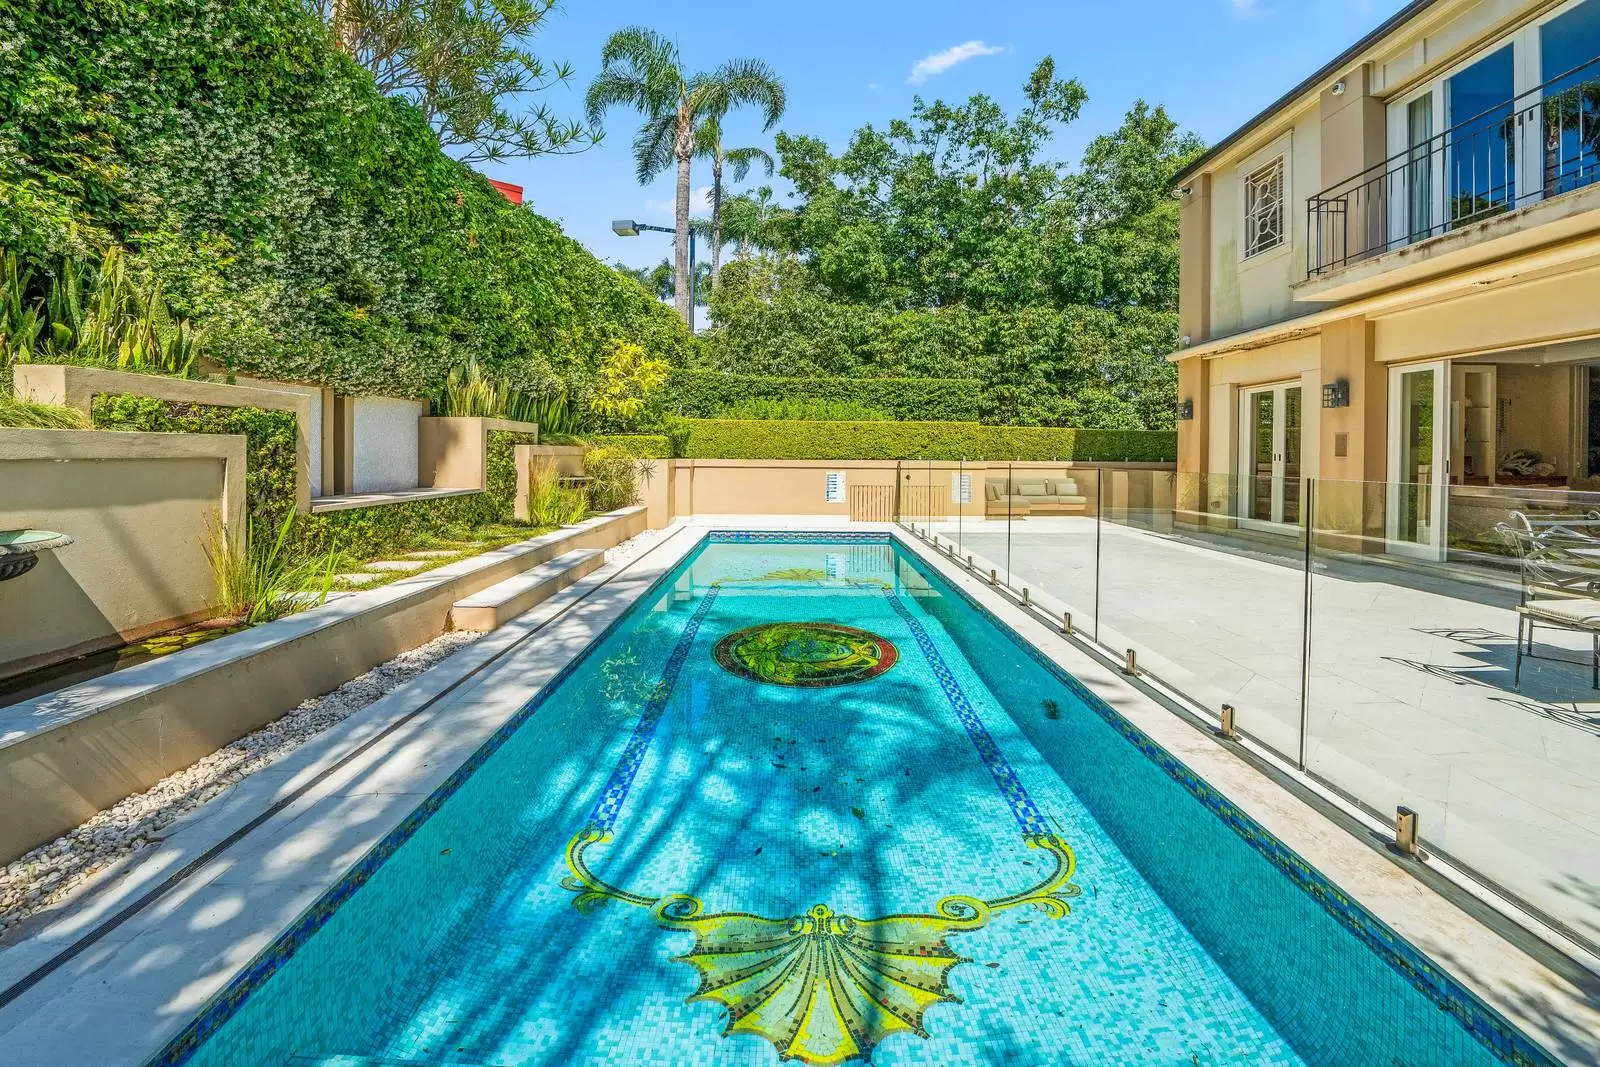 Photo #3: 29 Parsley Road, Vaucluse - Leased by Sydney Sotheby's International Realty